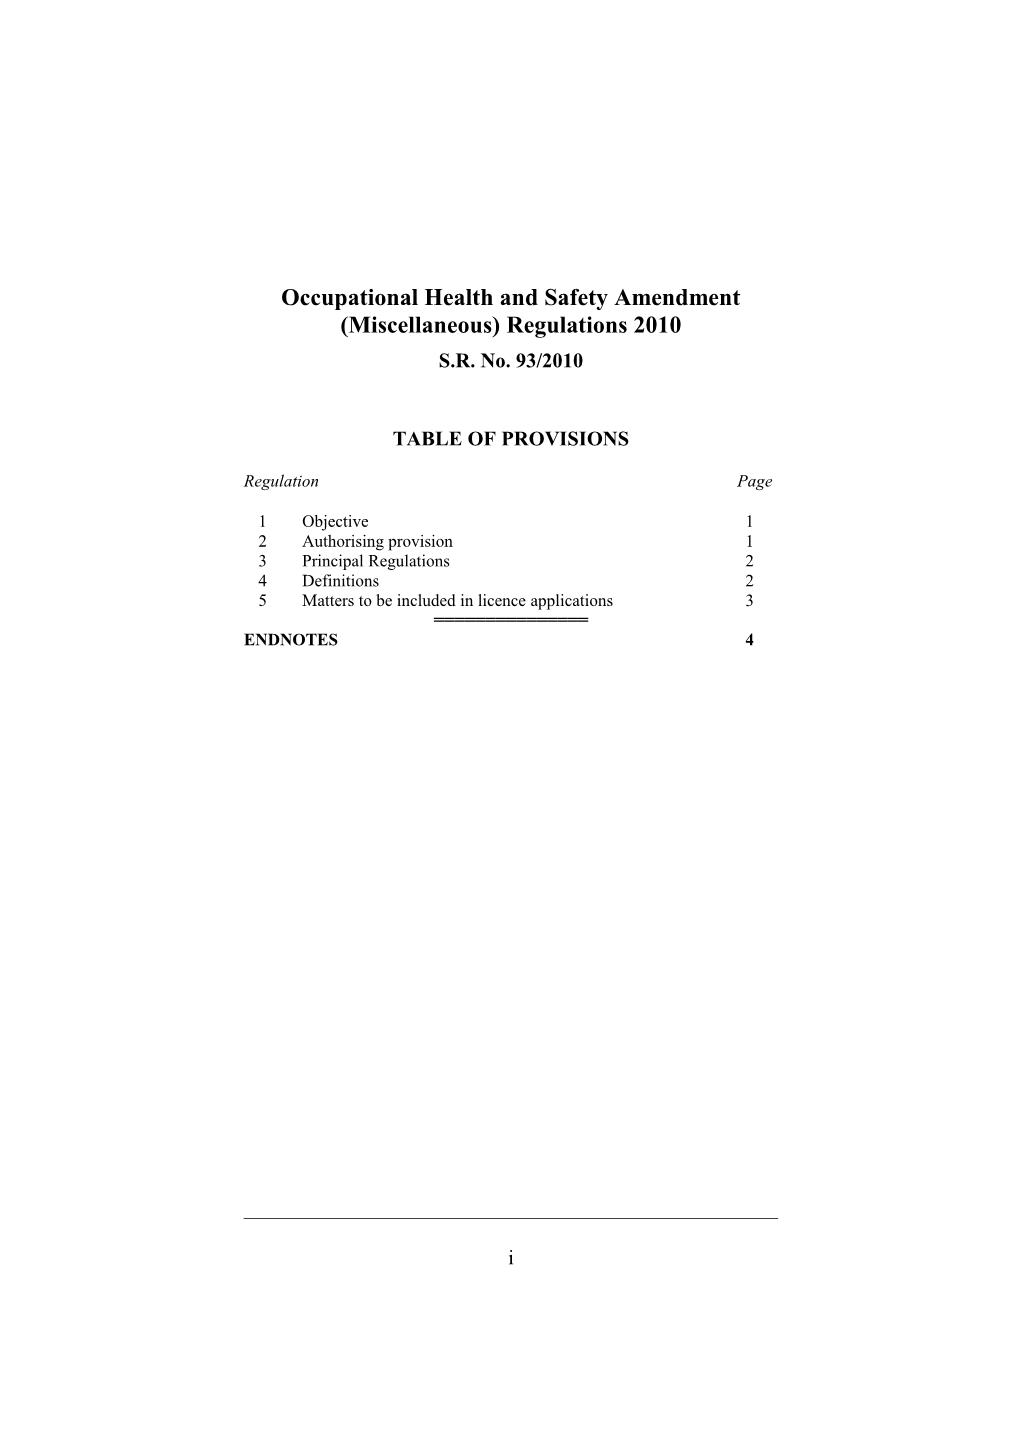 Occupational Health and Safety Amendment (Miscellaneous) Regulations 2010